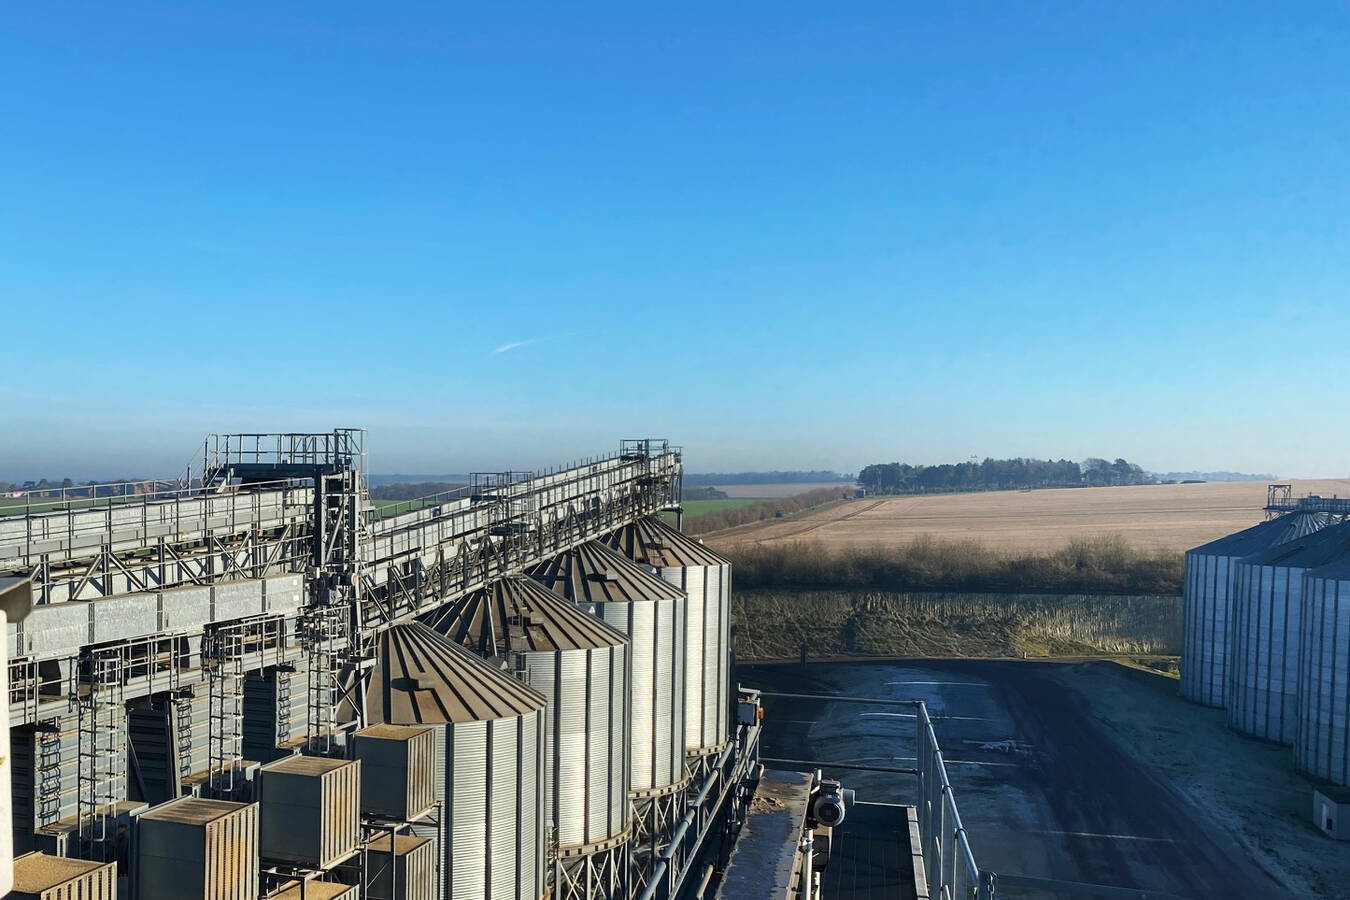 Upgrade of level monitoring system in grain storage A large grain storage facility in the south of England required a reliable content measuring device to replace an old acoustic wave system which was no longer functioning.